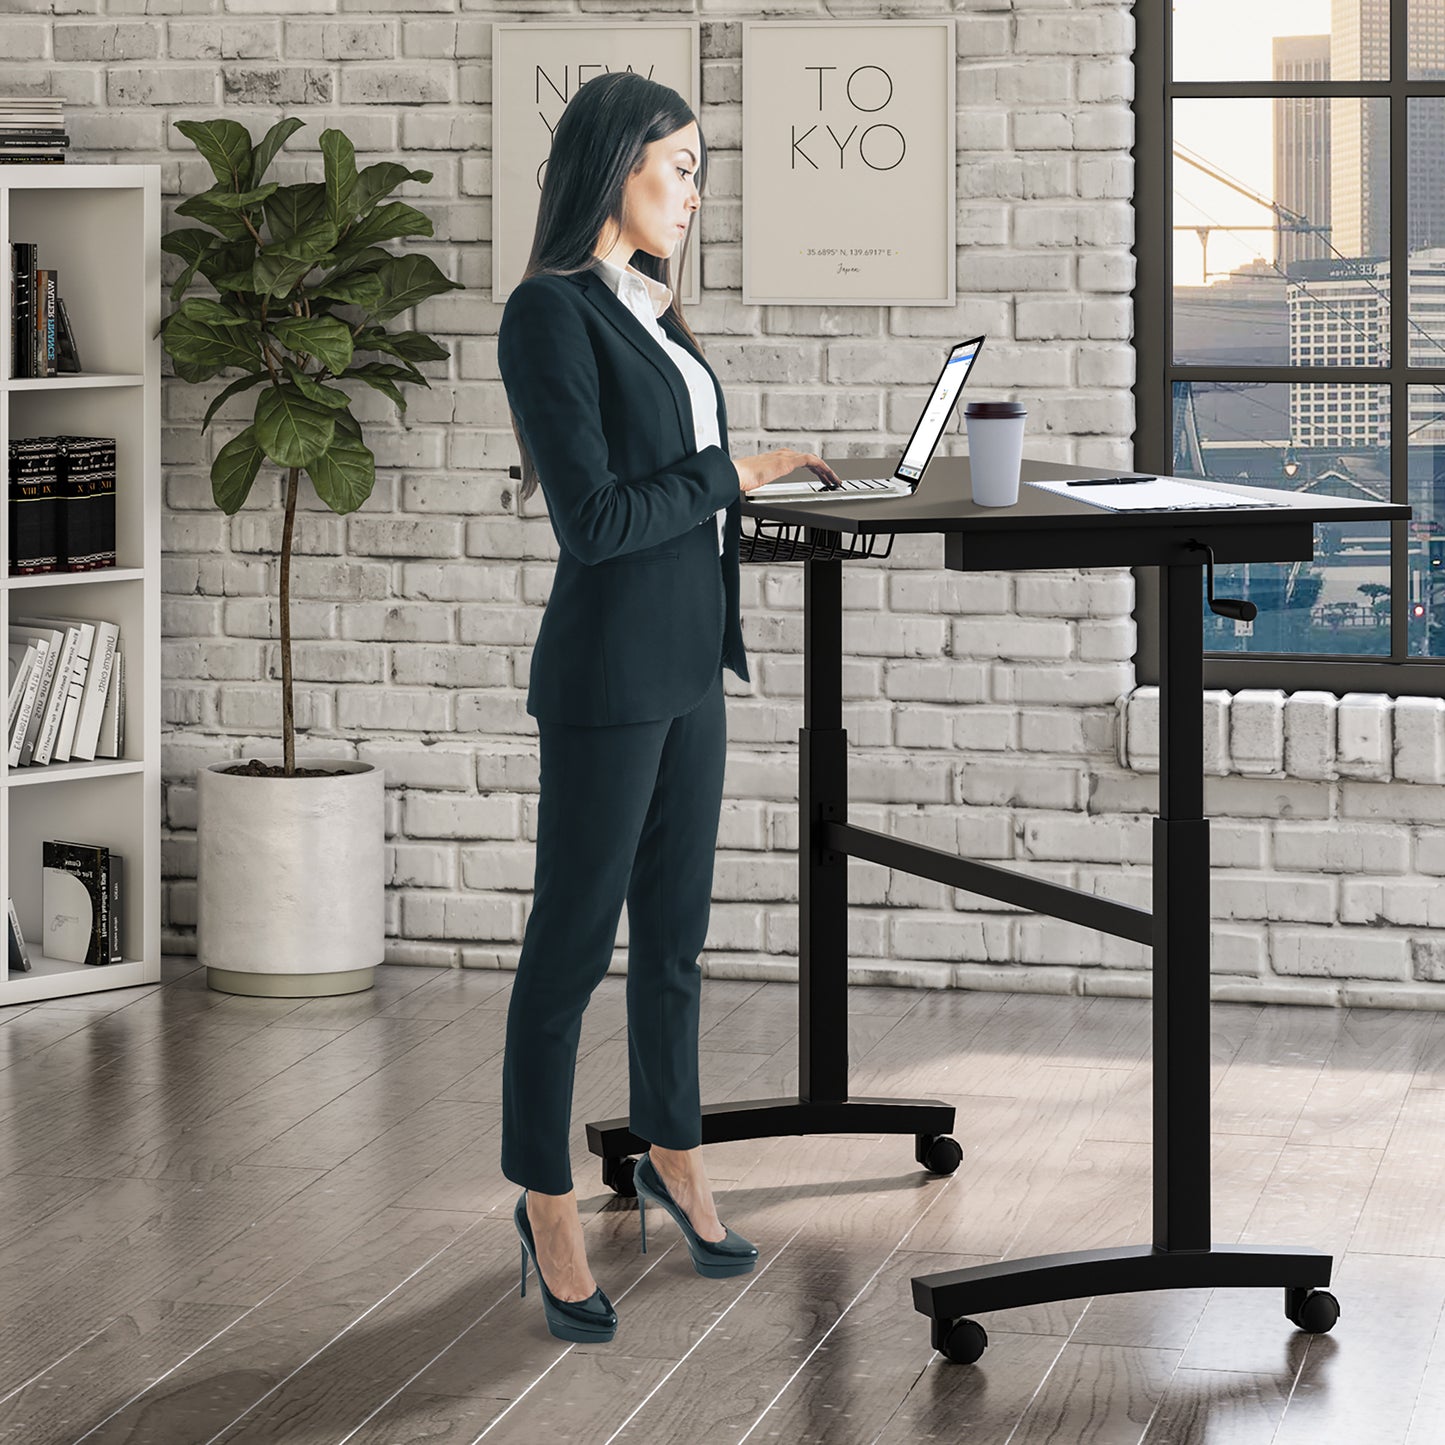 Sit Stand Desk with Casters Height Adjustable